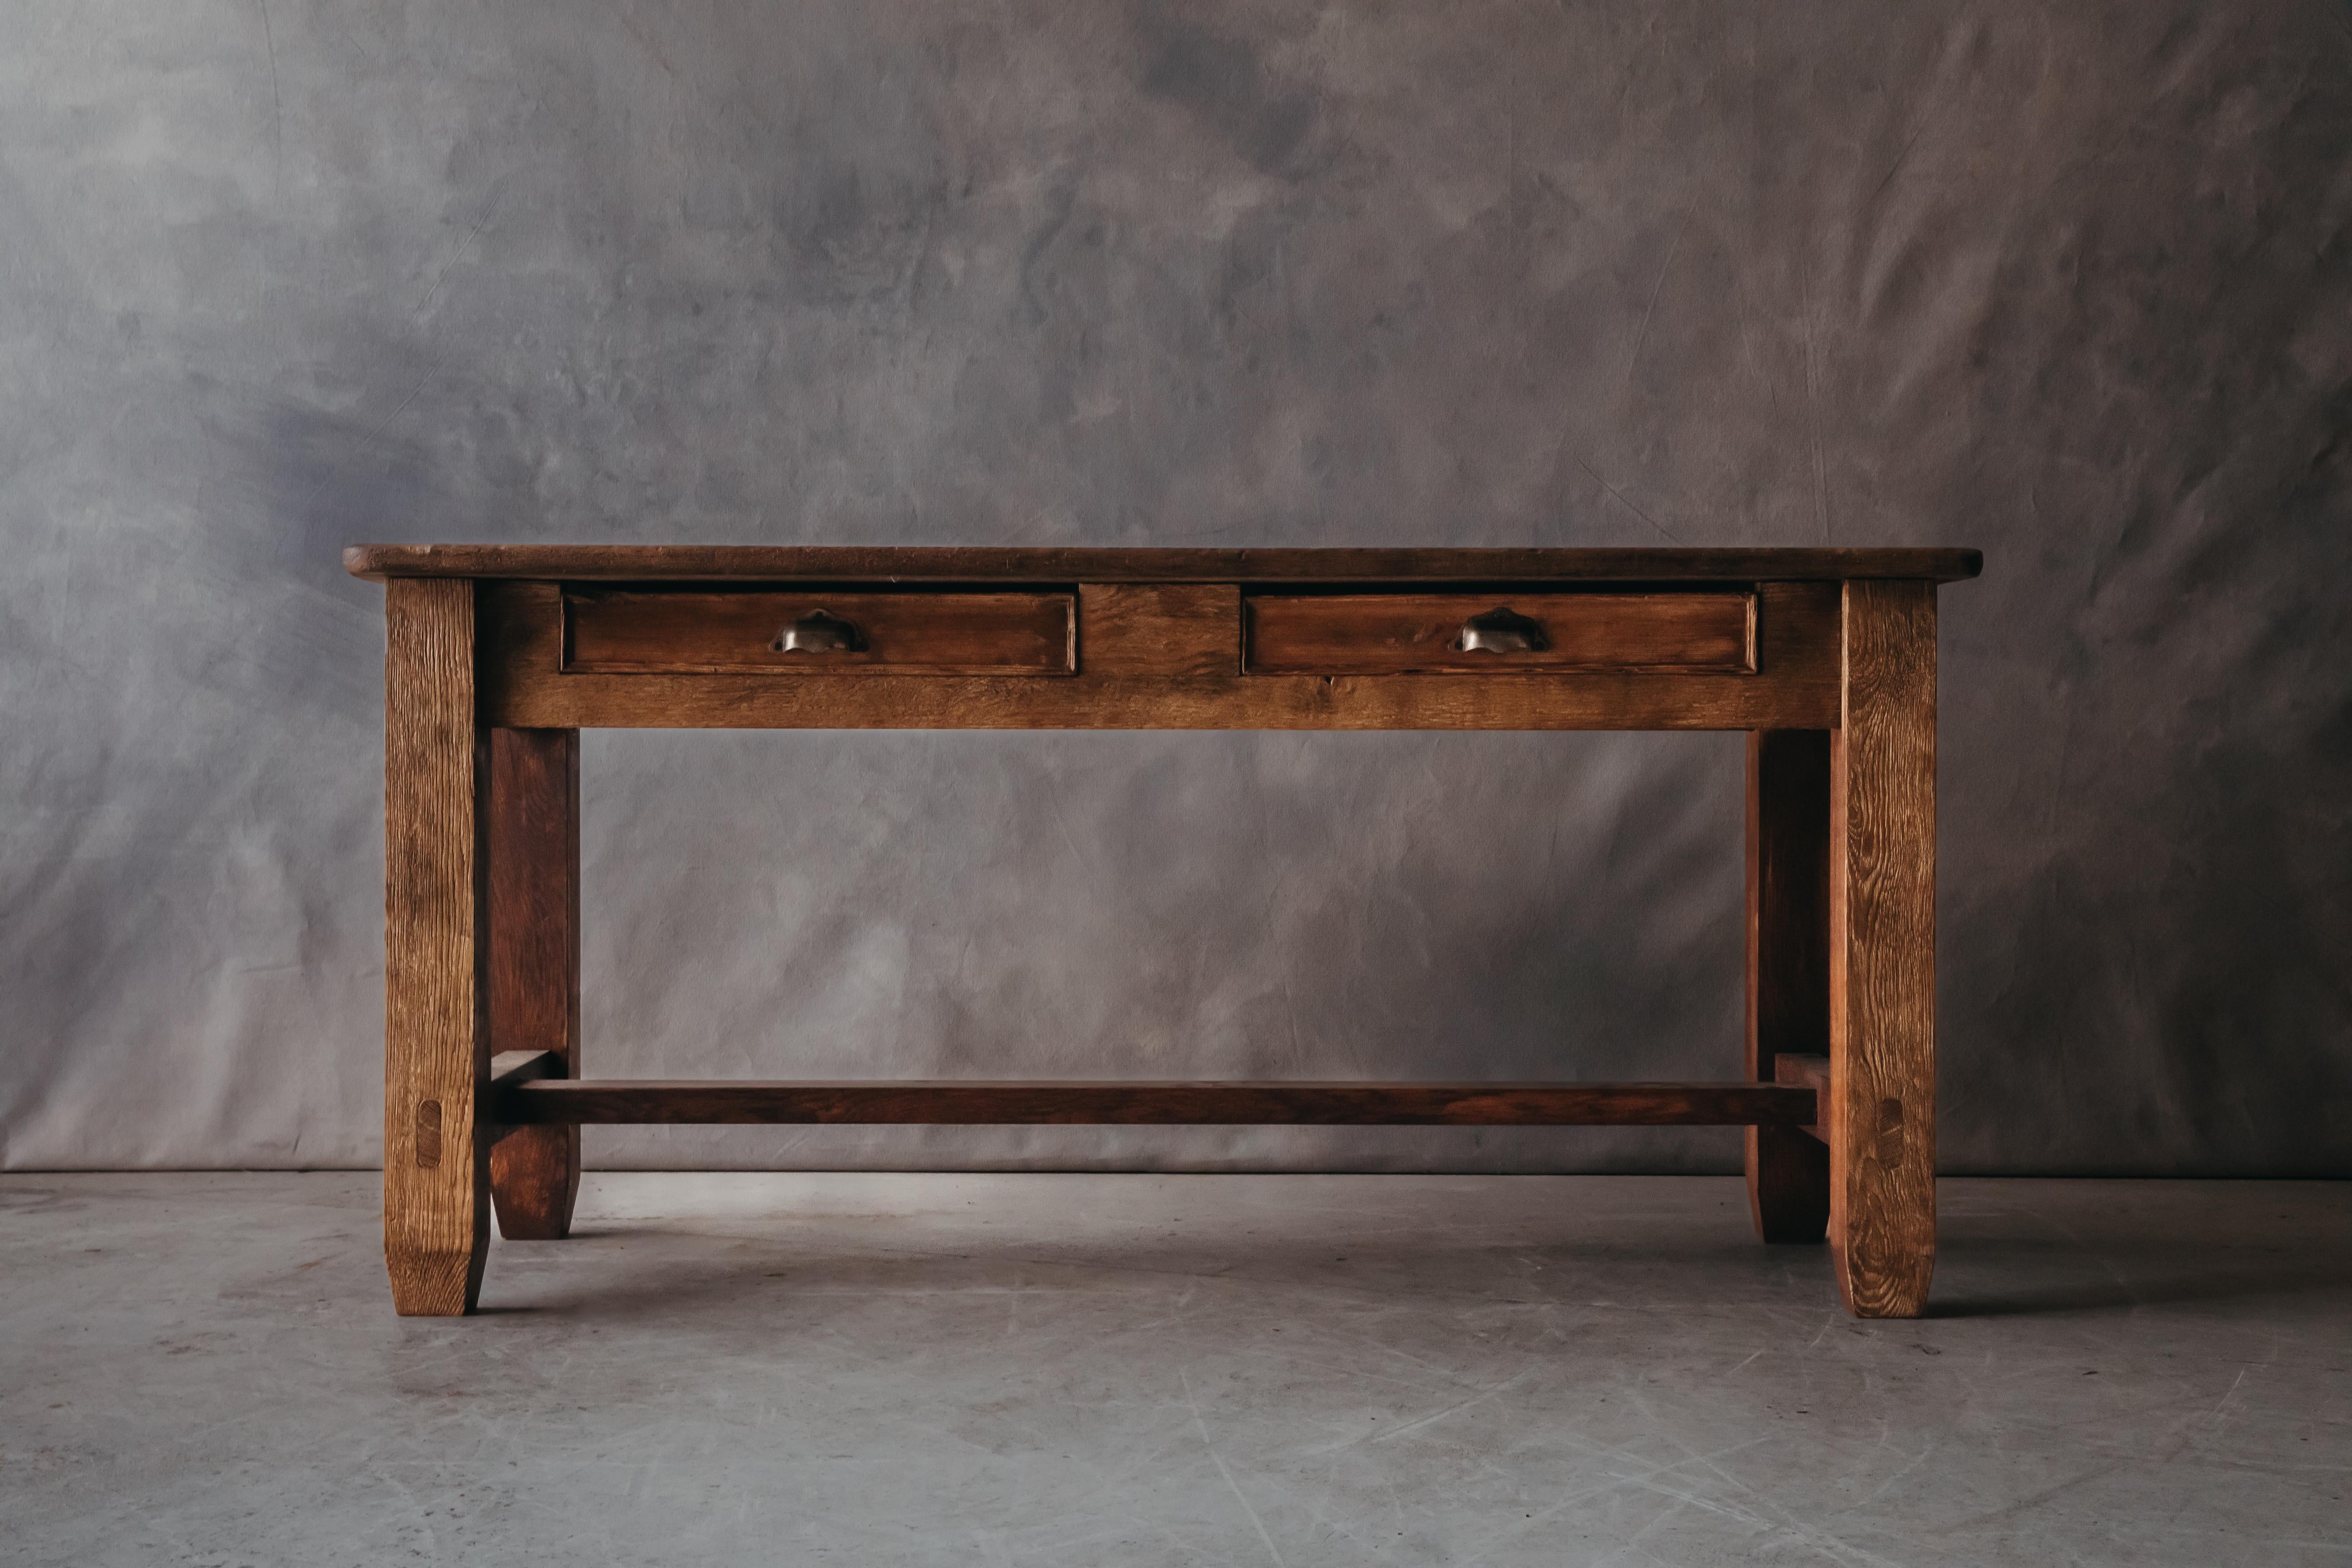 Vintage Oak Console Table From France, Circa 1940. Solid oak construction with superb patina and use. Original hardware.